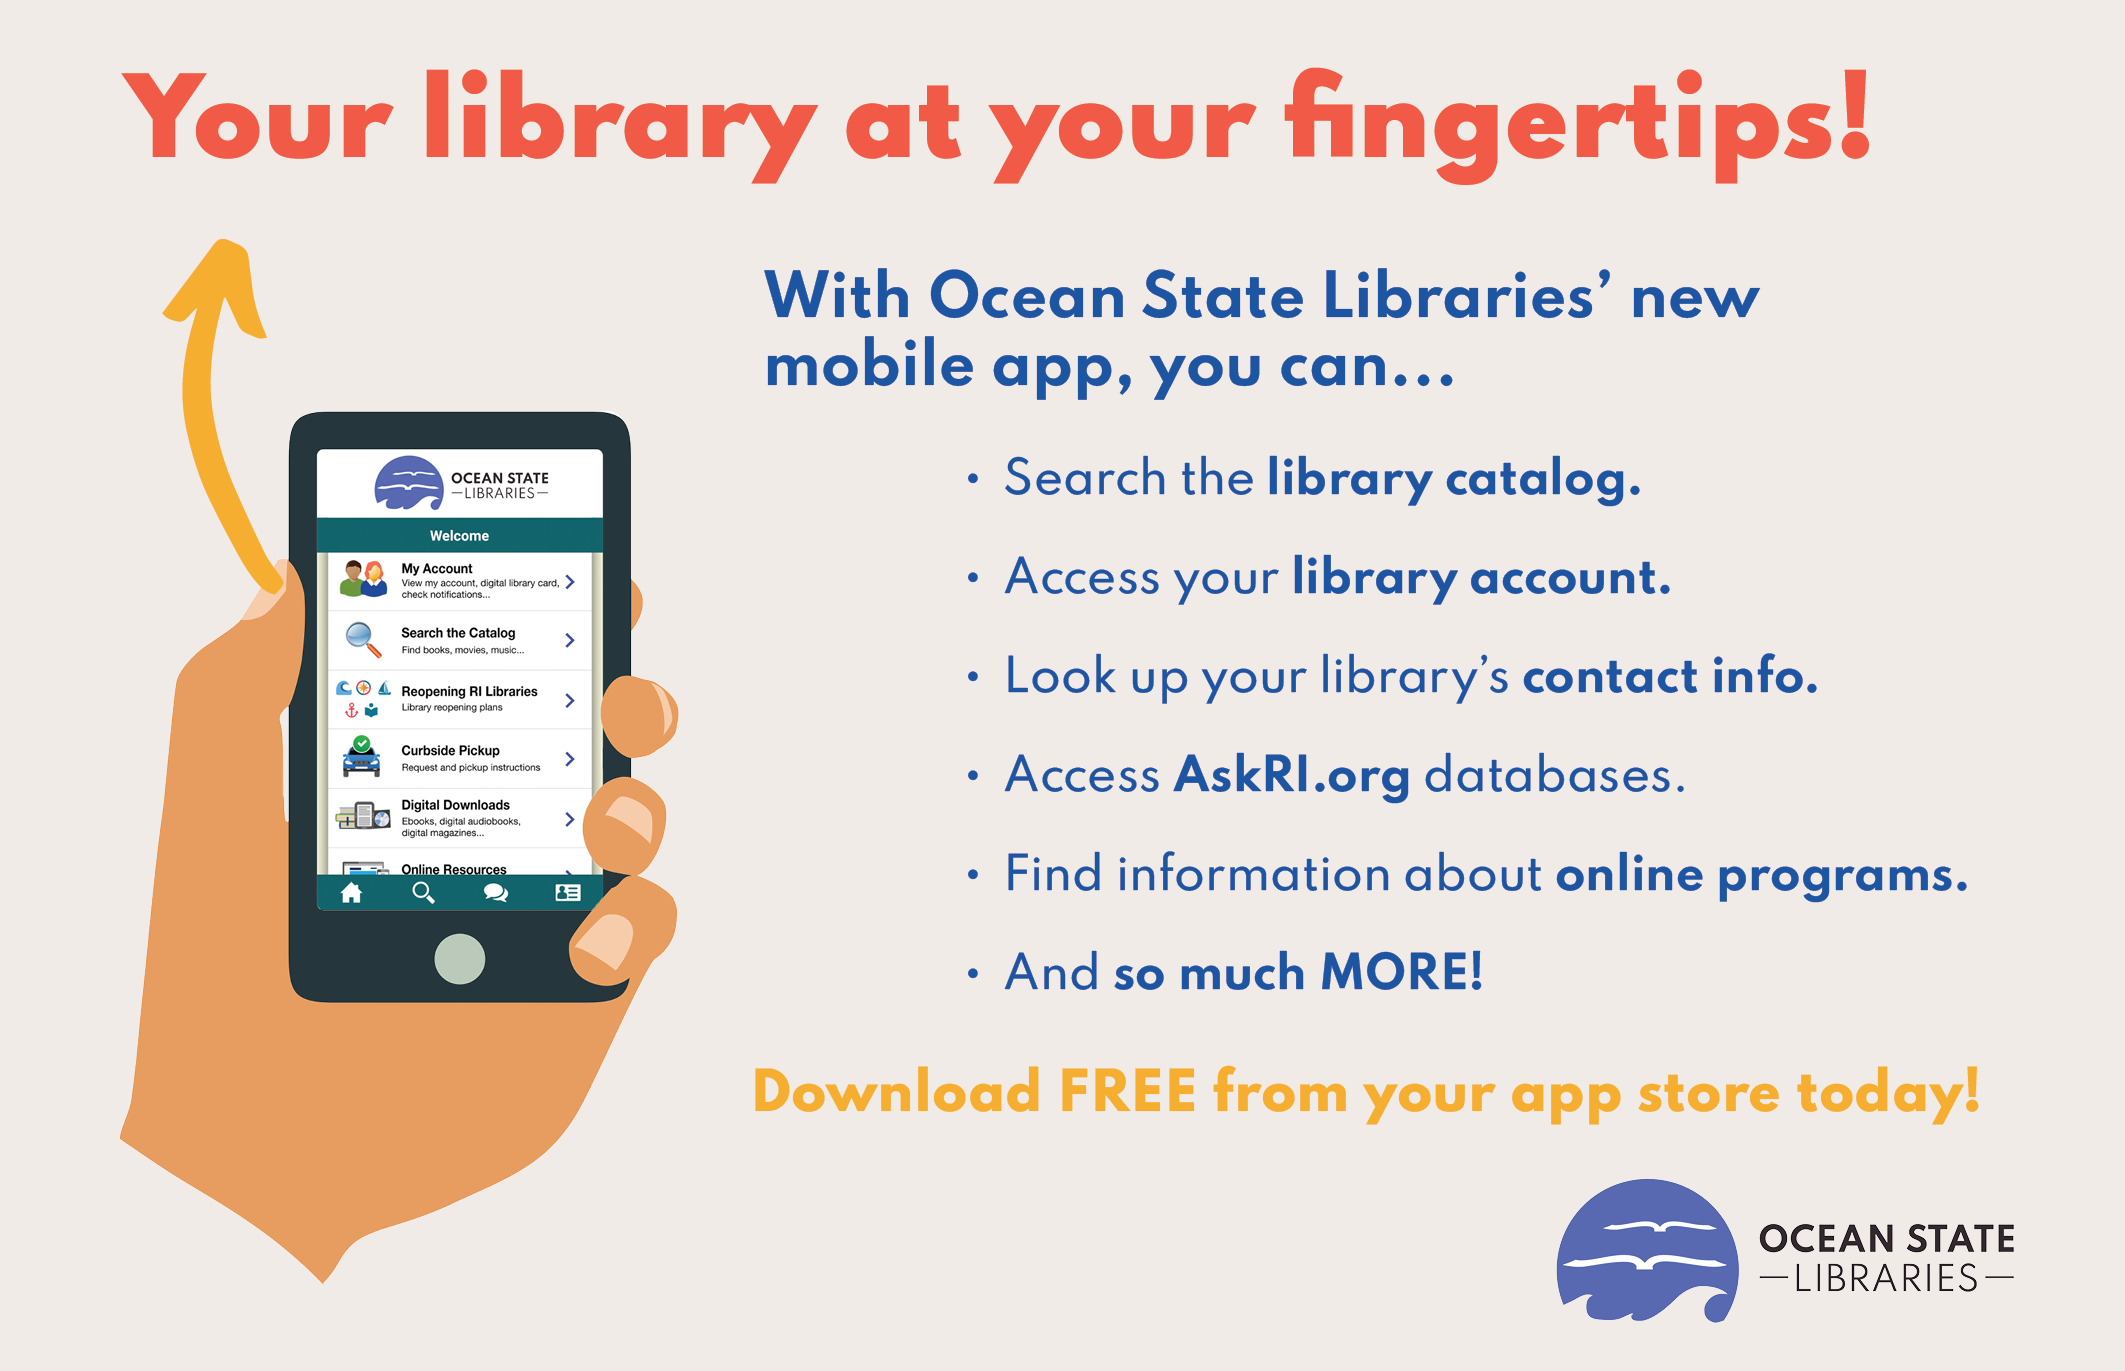 Ocean State Libraries has a new mobile app